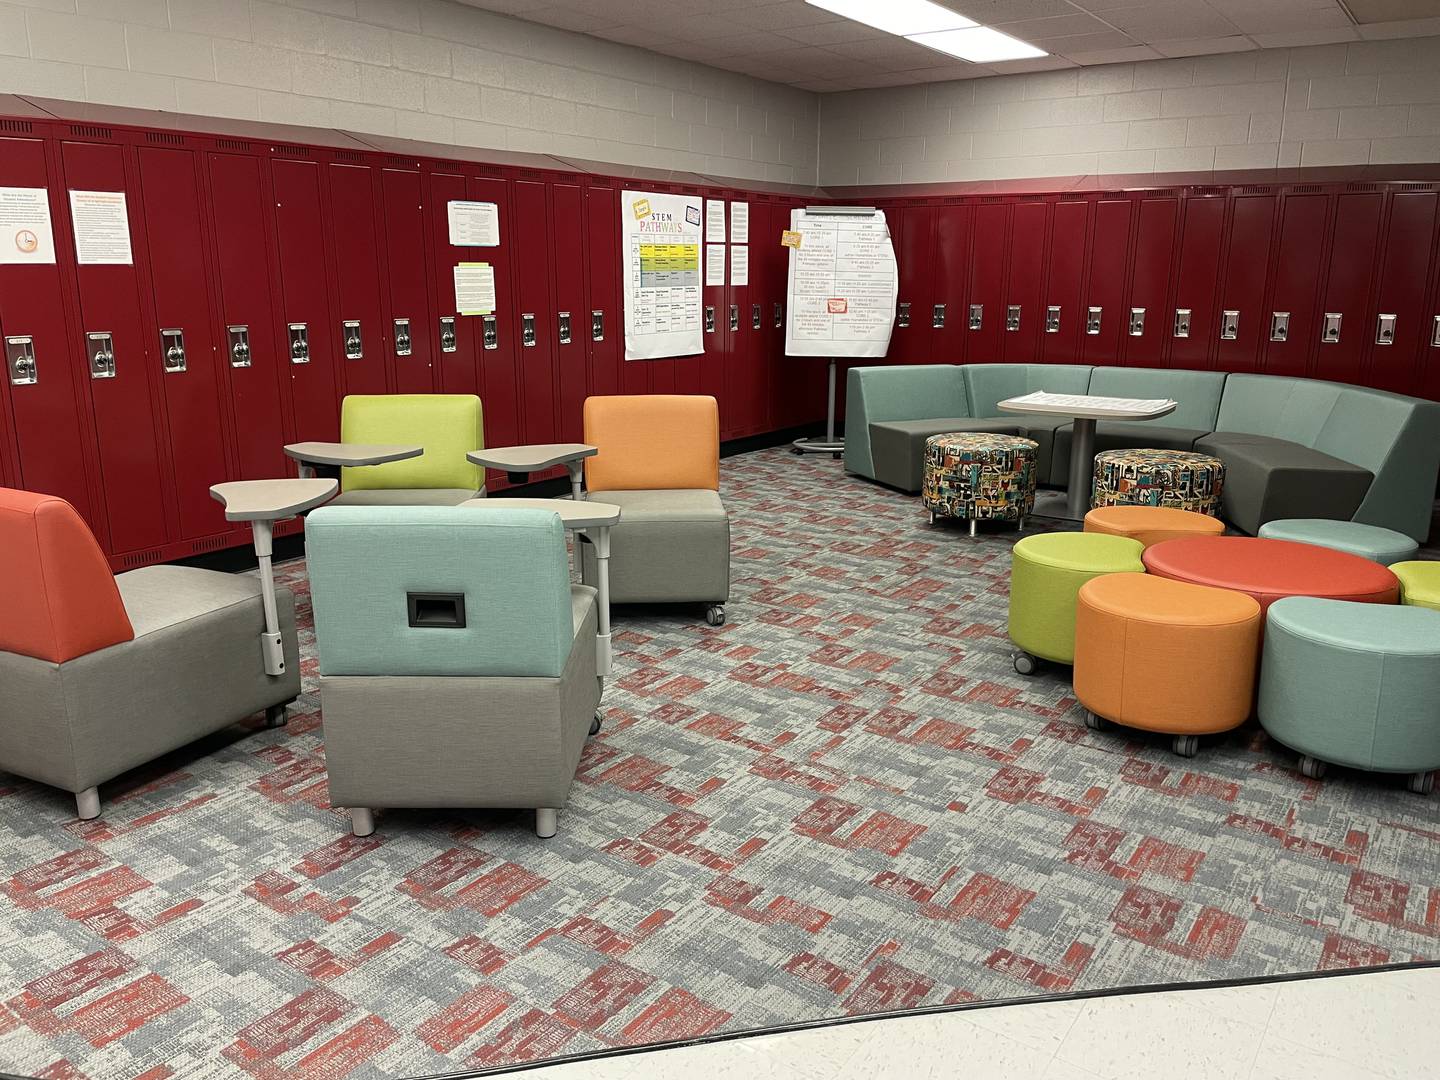 The interior of the new Kaneland IgKnight Academy is shown. The school will open to students in the fall of 2023.